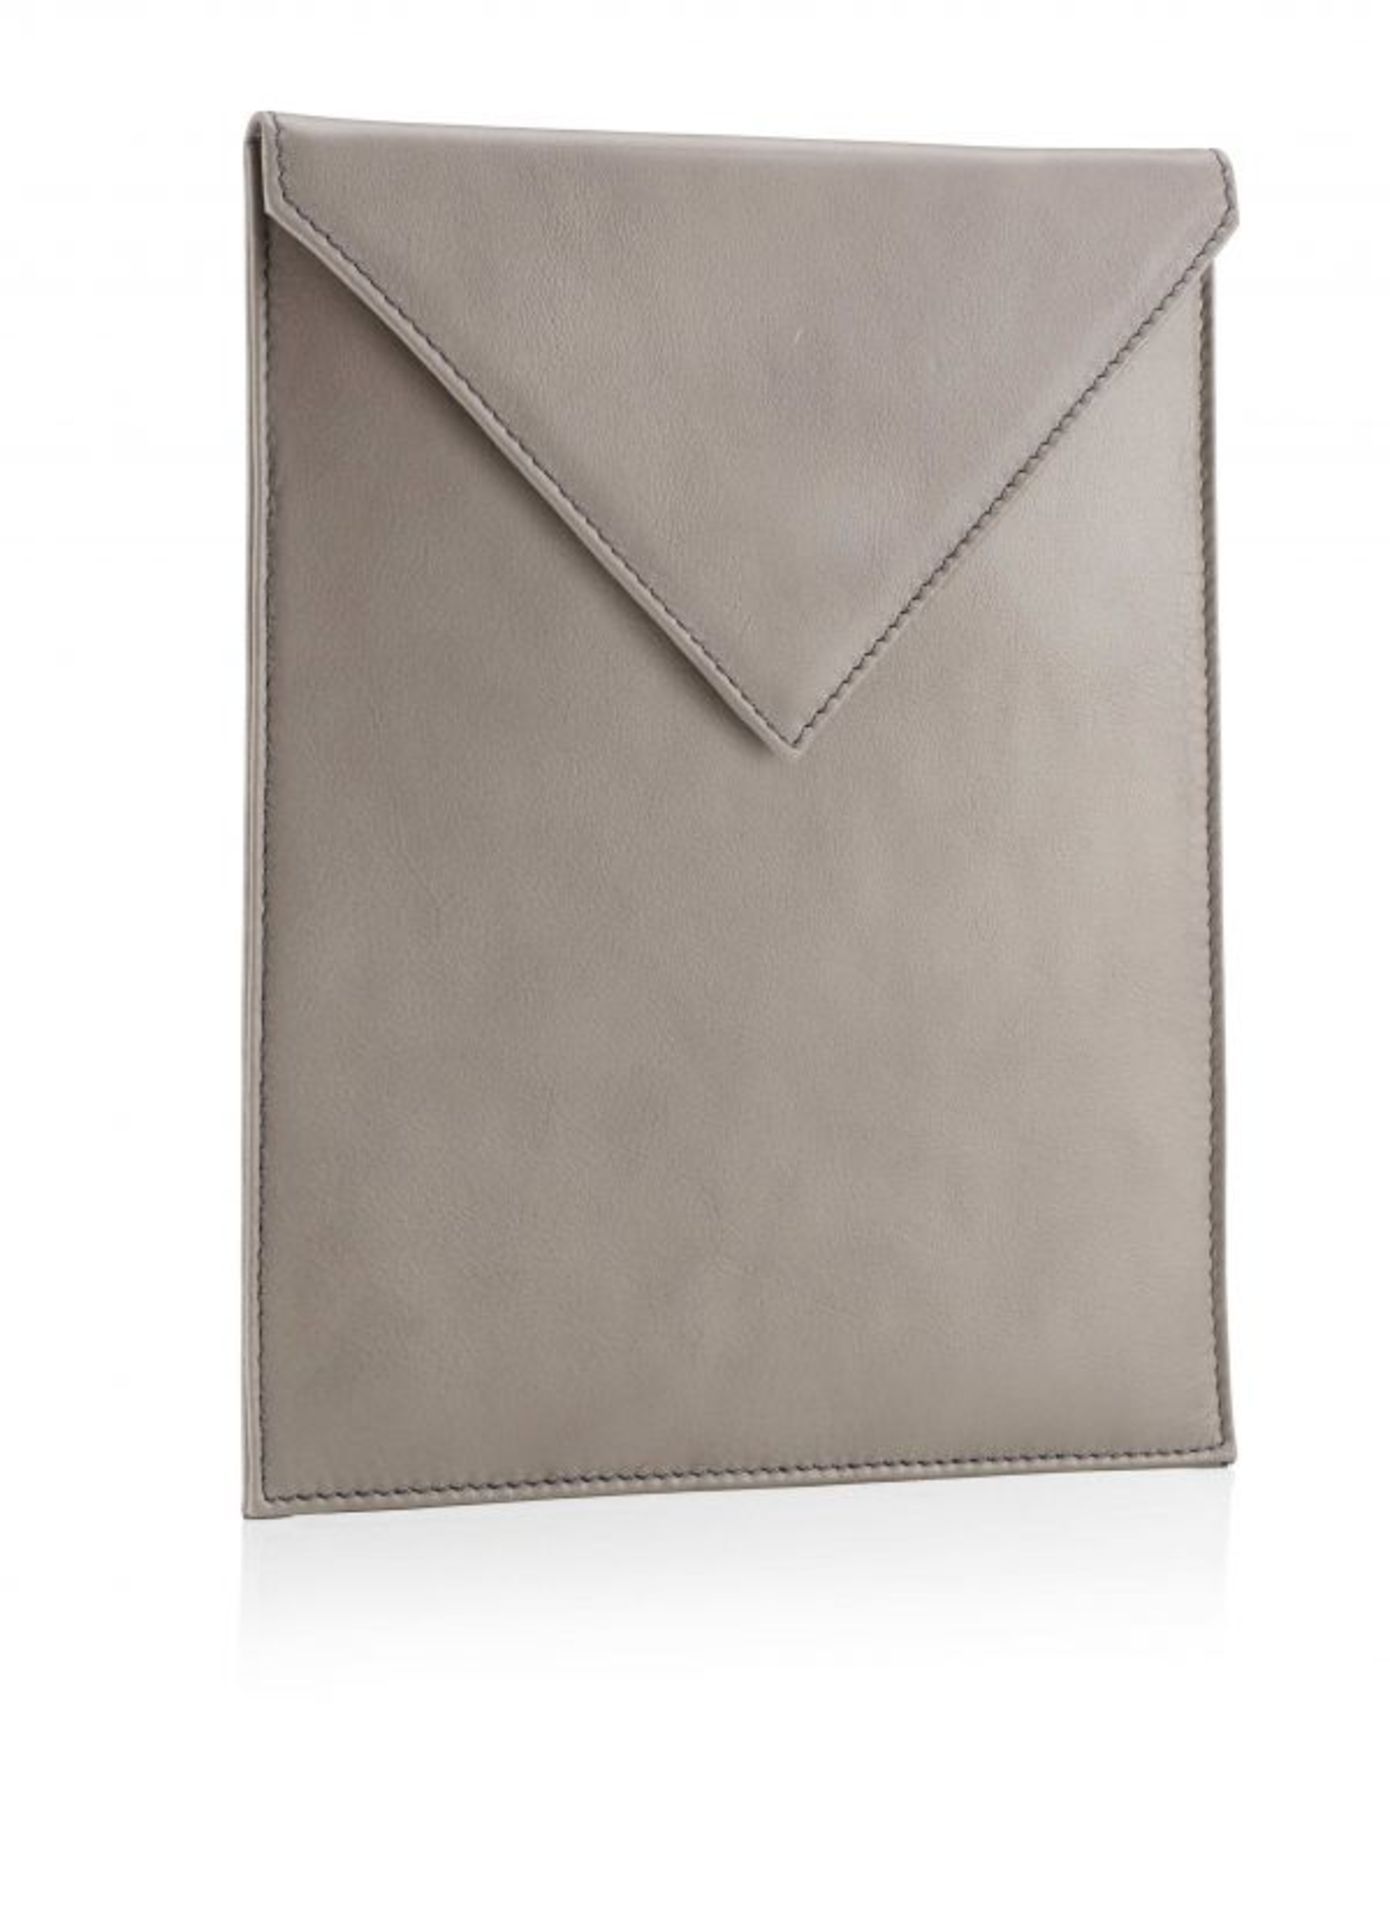 VERTICAL VENICE ENVELOPE IPAD COVER Grey RRP £145.00 The stylish and sophisticated Venice iPad Cover